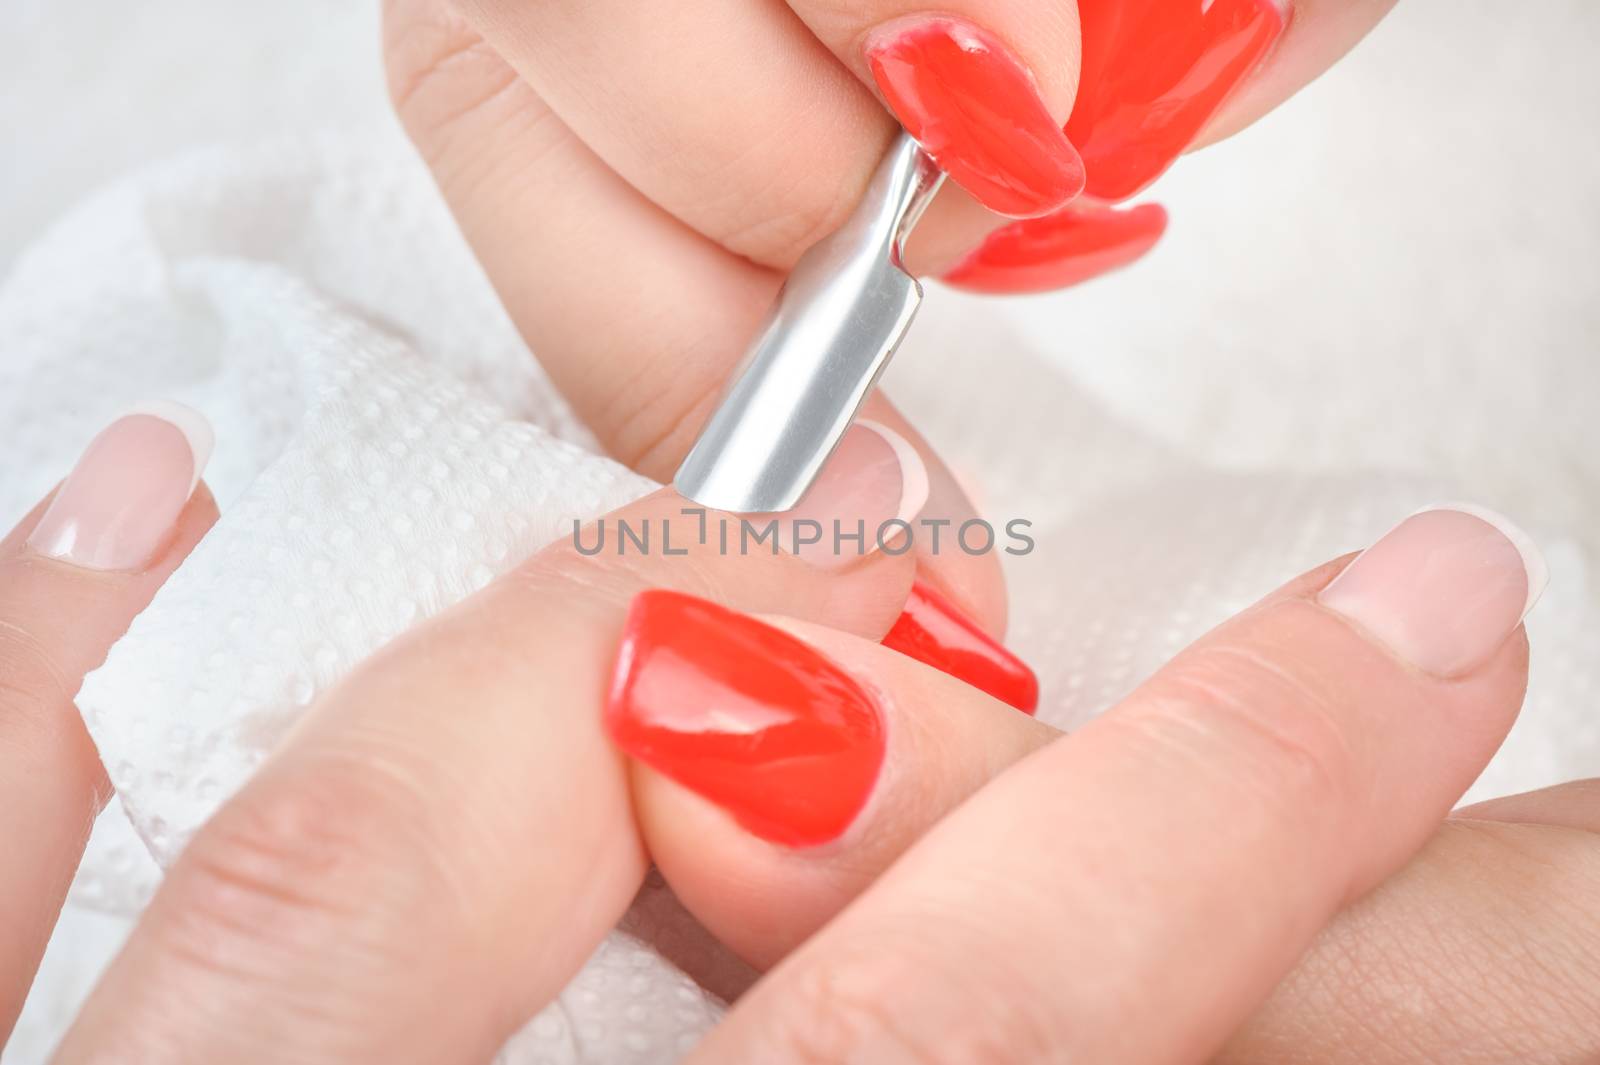 Nail salon, hands beauty treatment, cuticles care with metal cuticle pusher